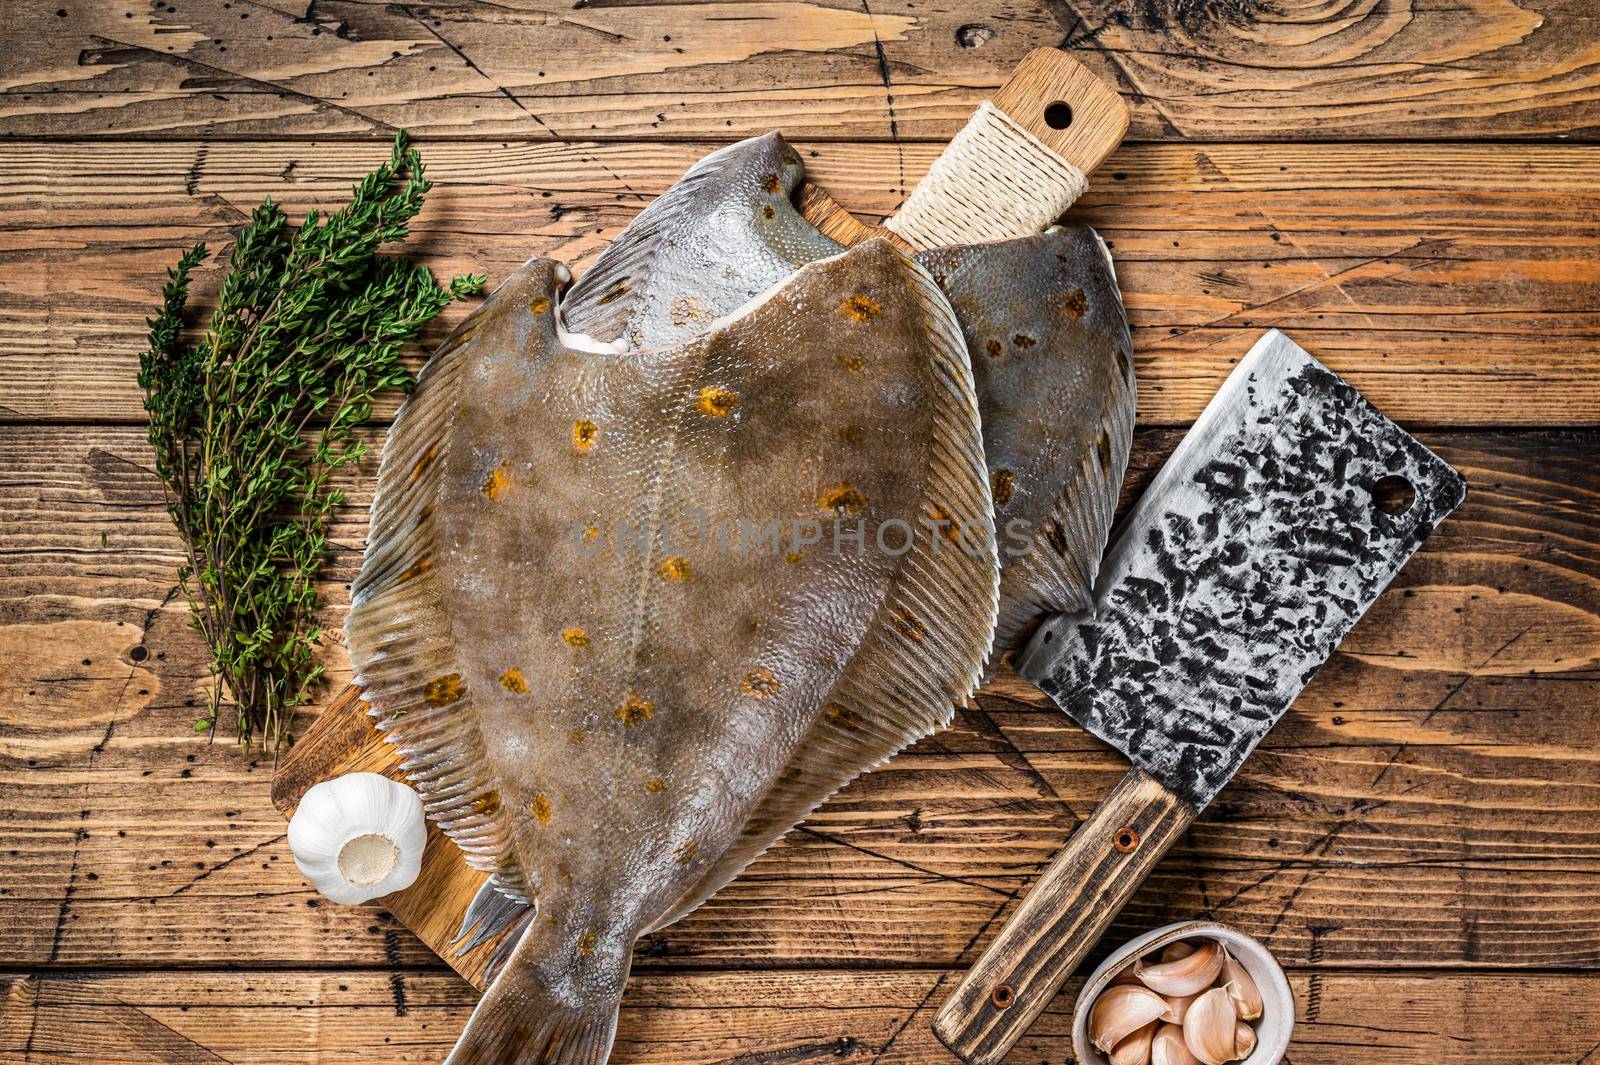 Raw flounder flatfish on butcher board with cleaver. wooden background. Top view.